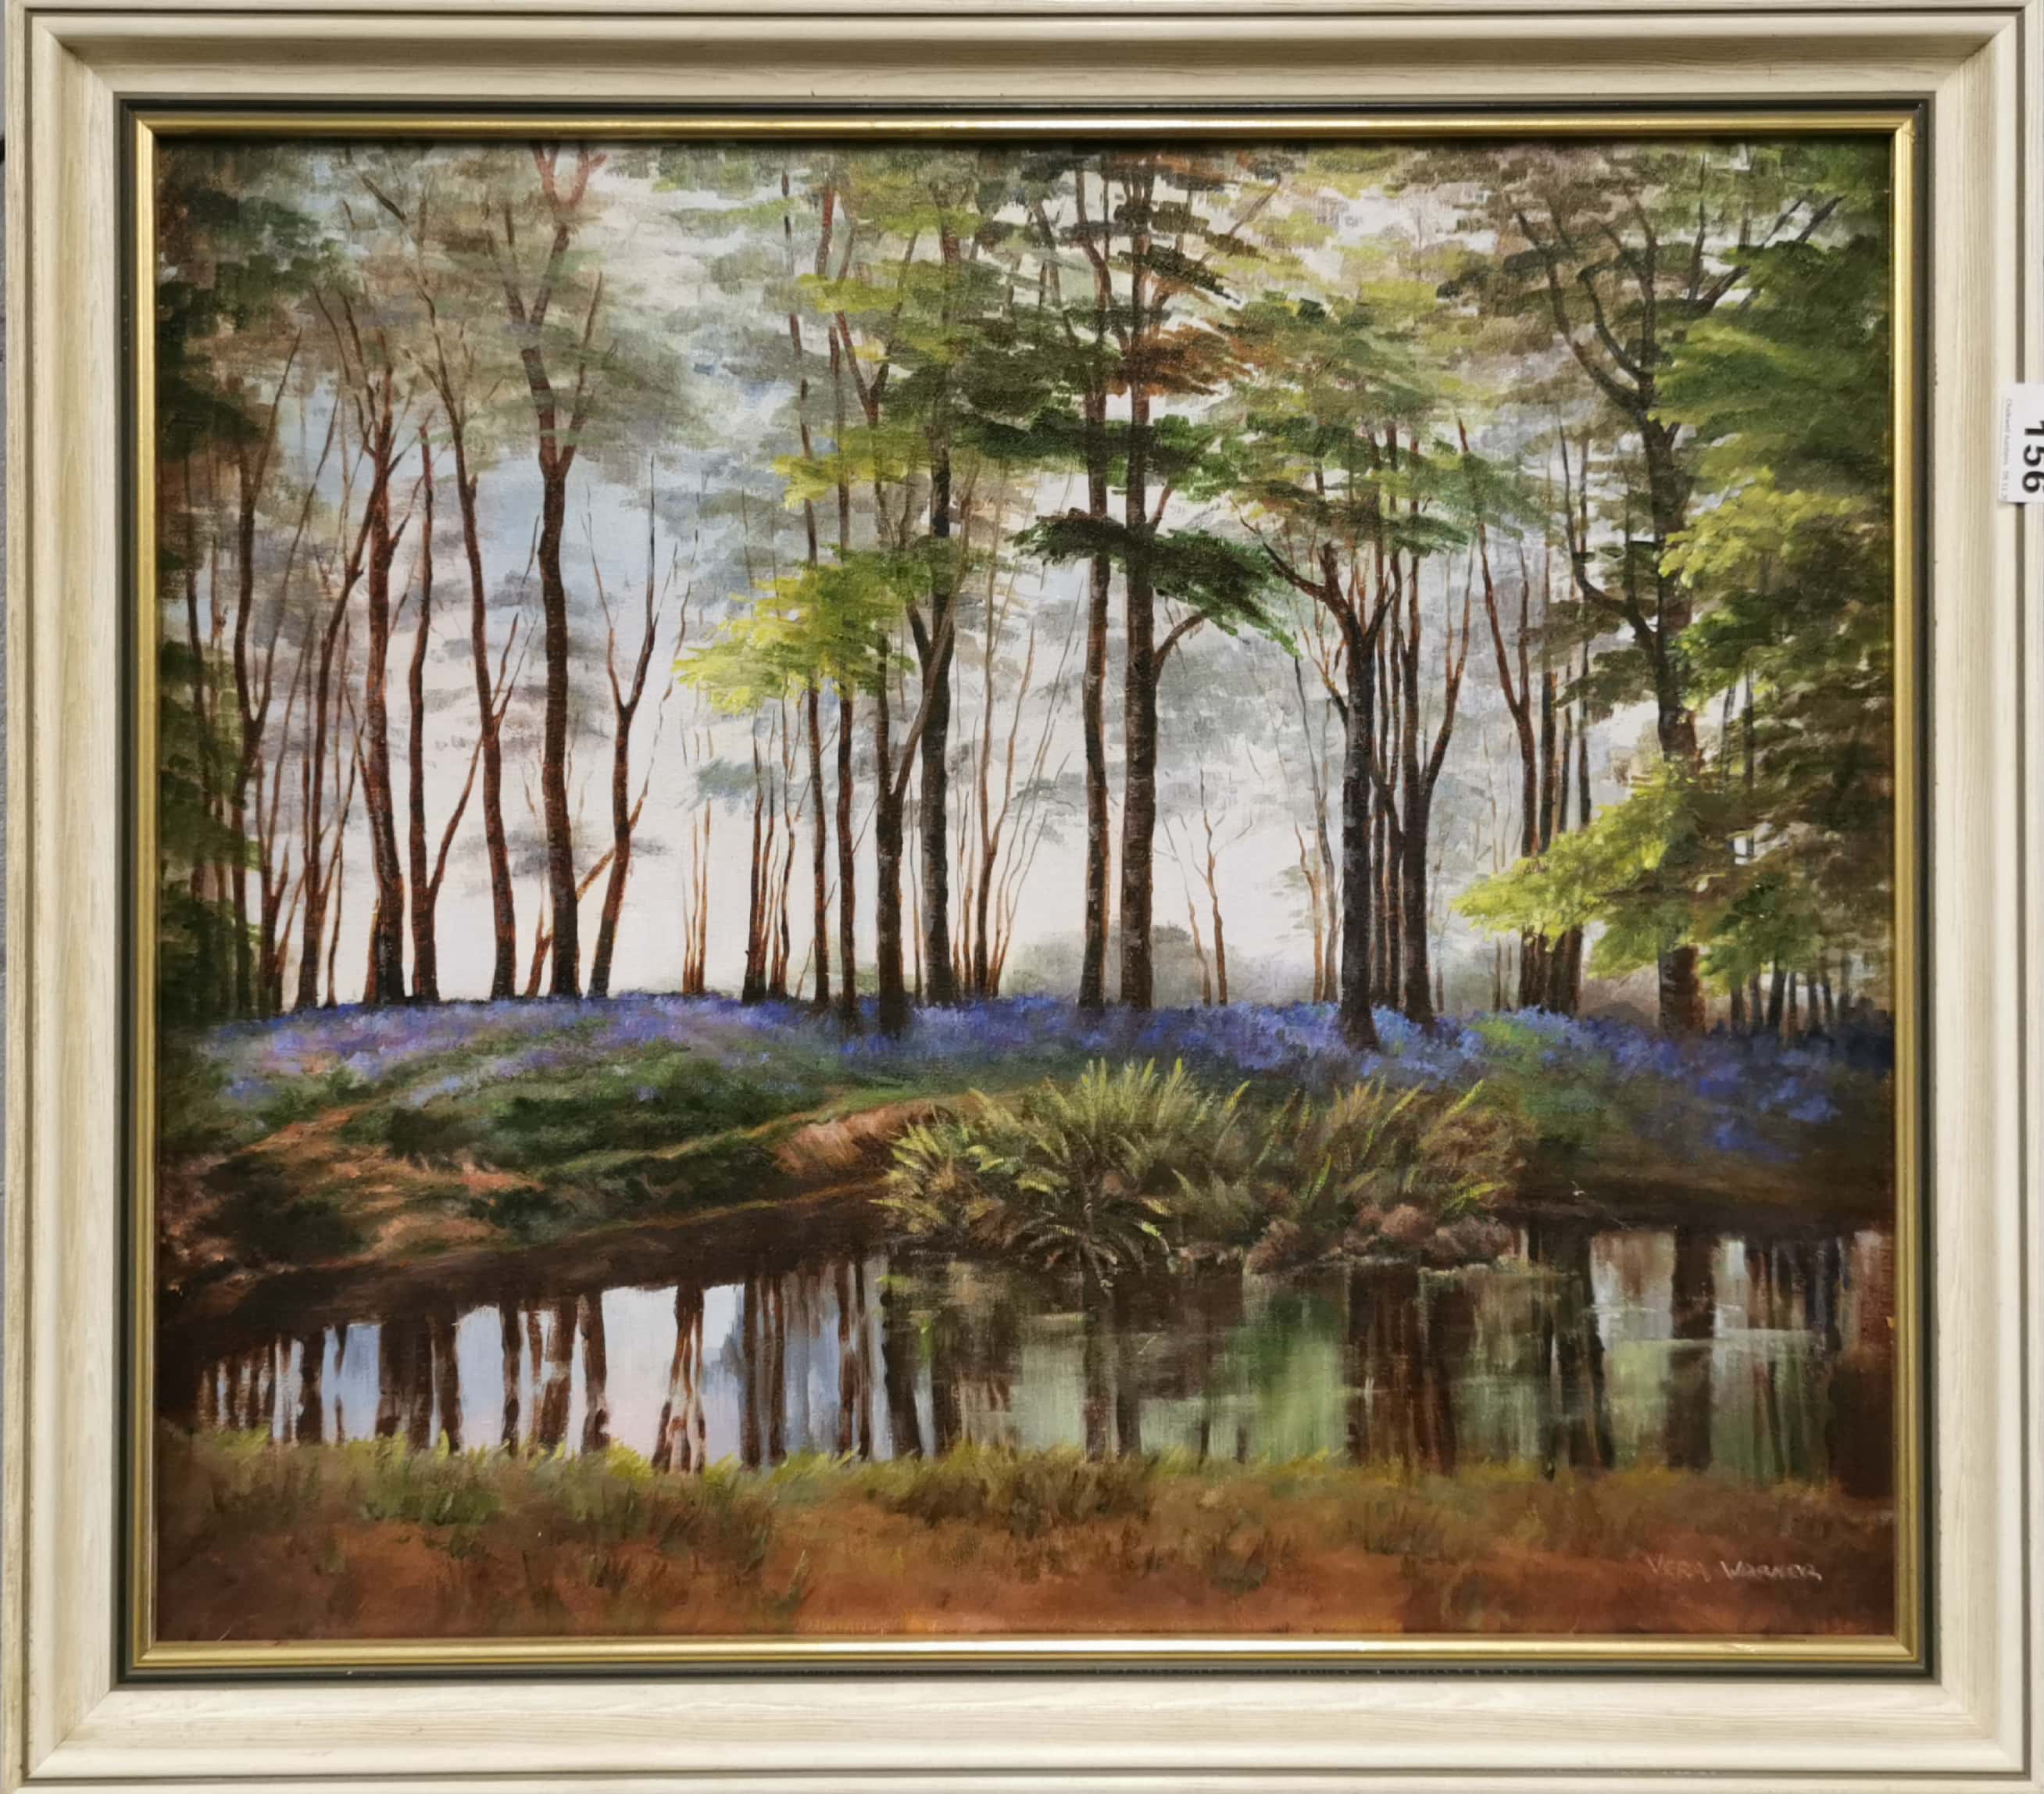 A framed oil on canvas 'Bluebell Wood' by Vera Warner, frame size 69 x 59cm.